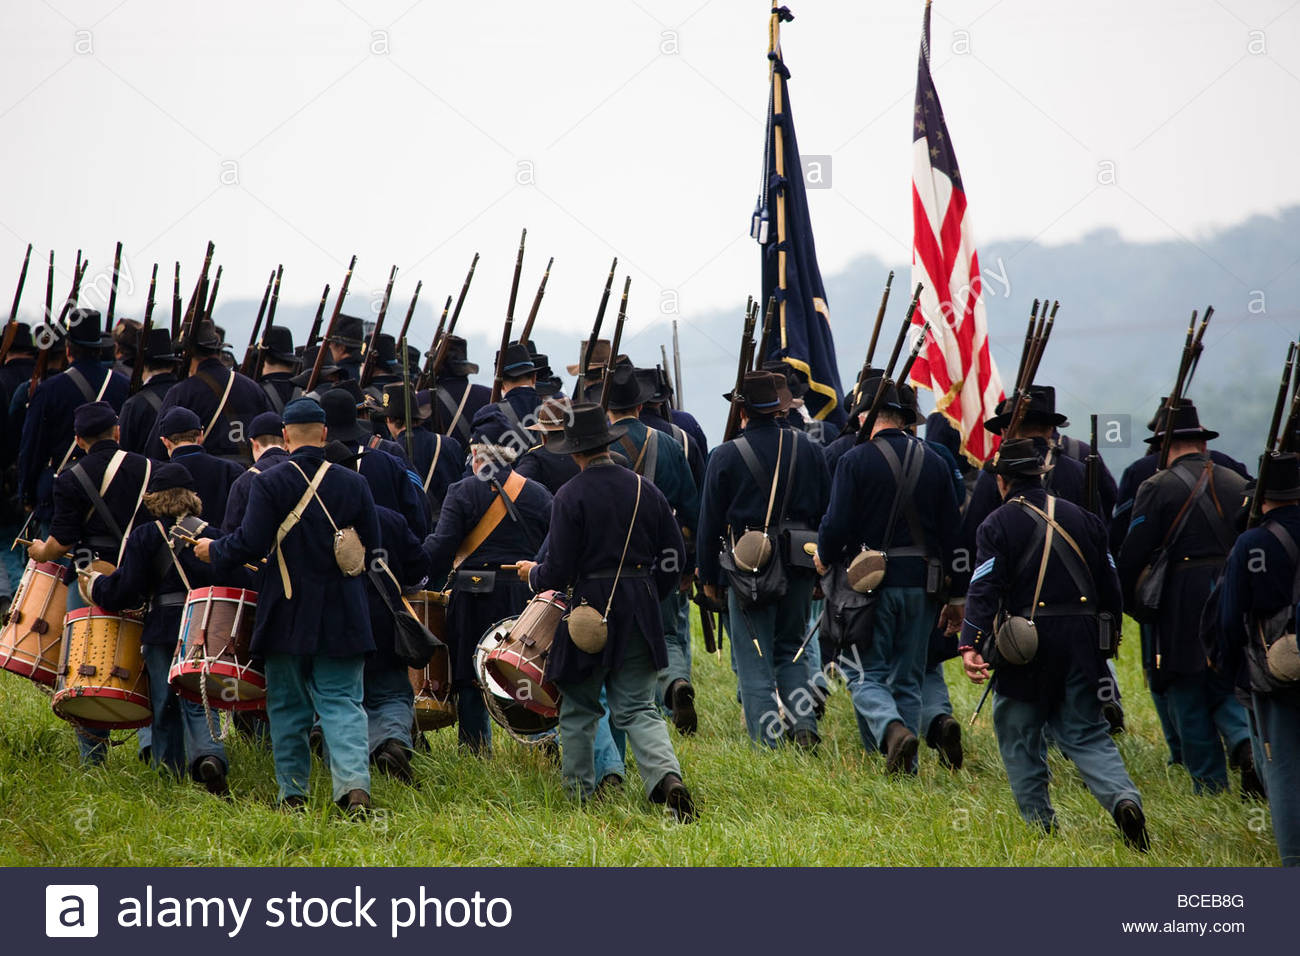 union-soldiers-march-into-battle-for-a-civil-war-reenactment-BCEB8G.jpg